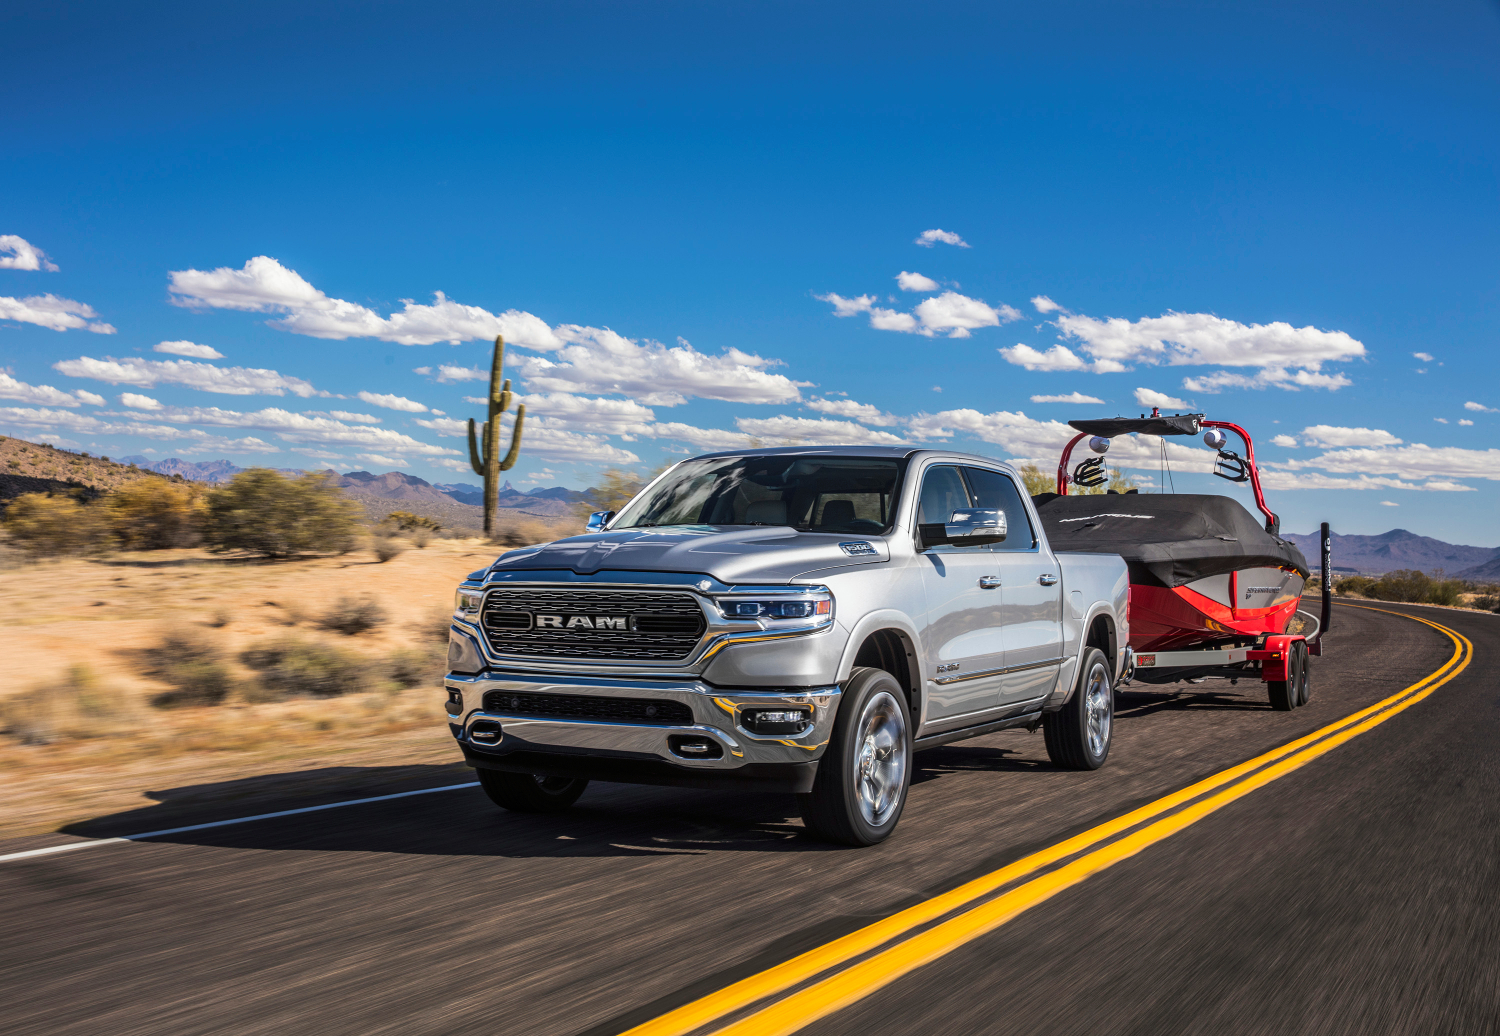 The 2022 Ram 1500 is one of the Best Full-Size Pickup Trucks